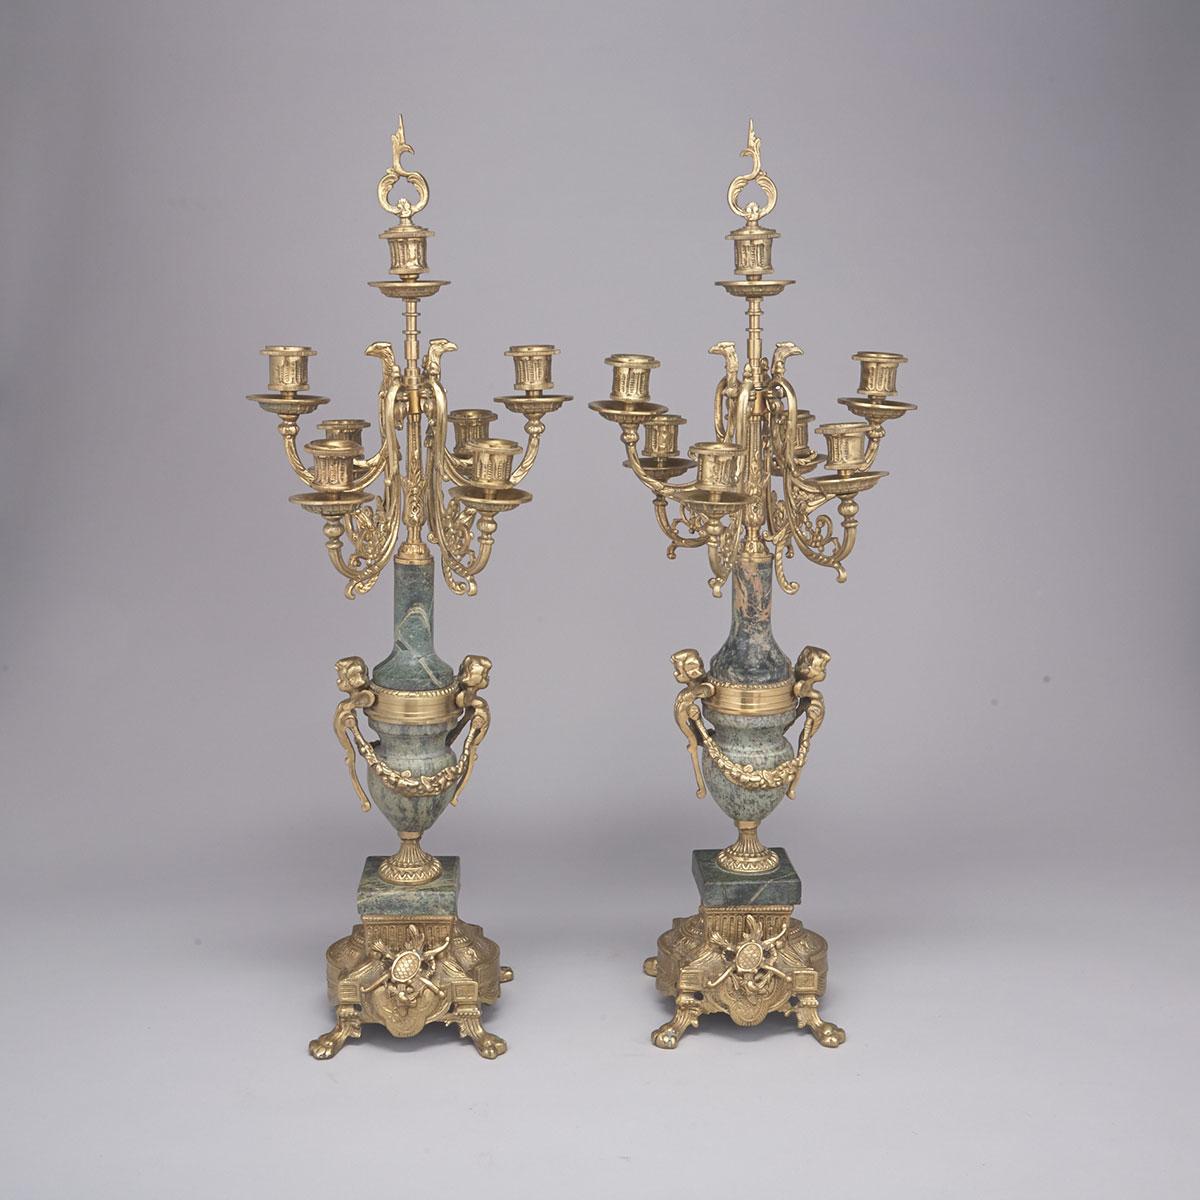 Pair of French Verde Antico Marble Mounted Bronze Seven Light Candelabra, mid 20th century